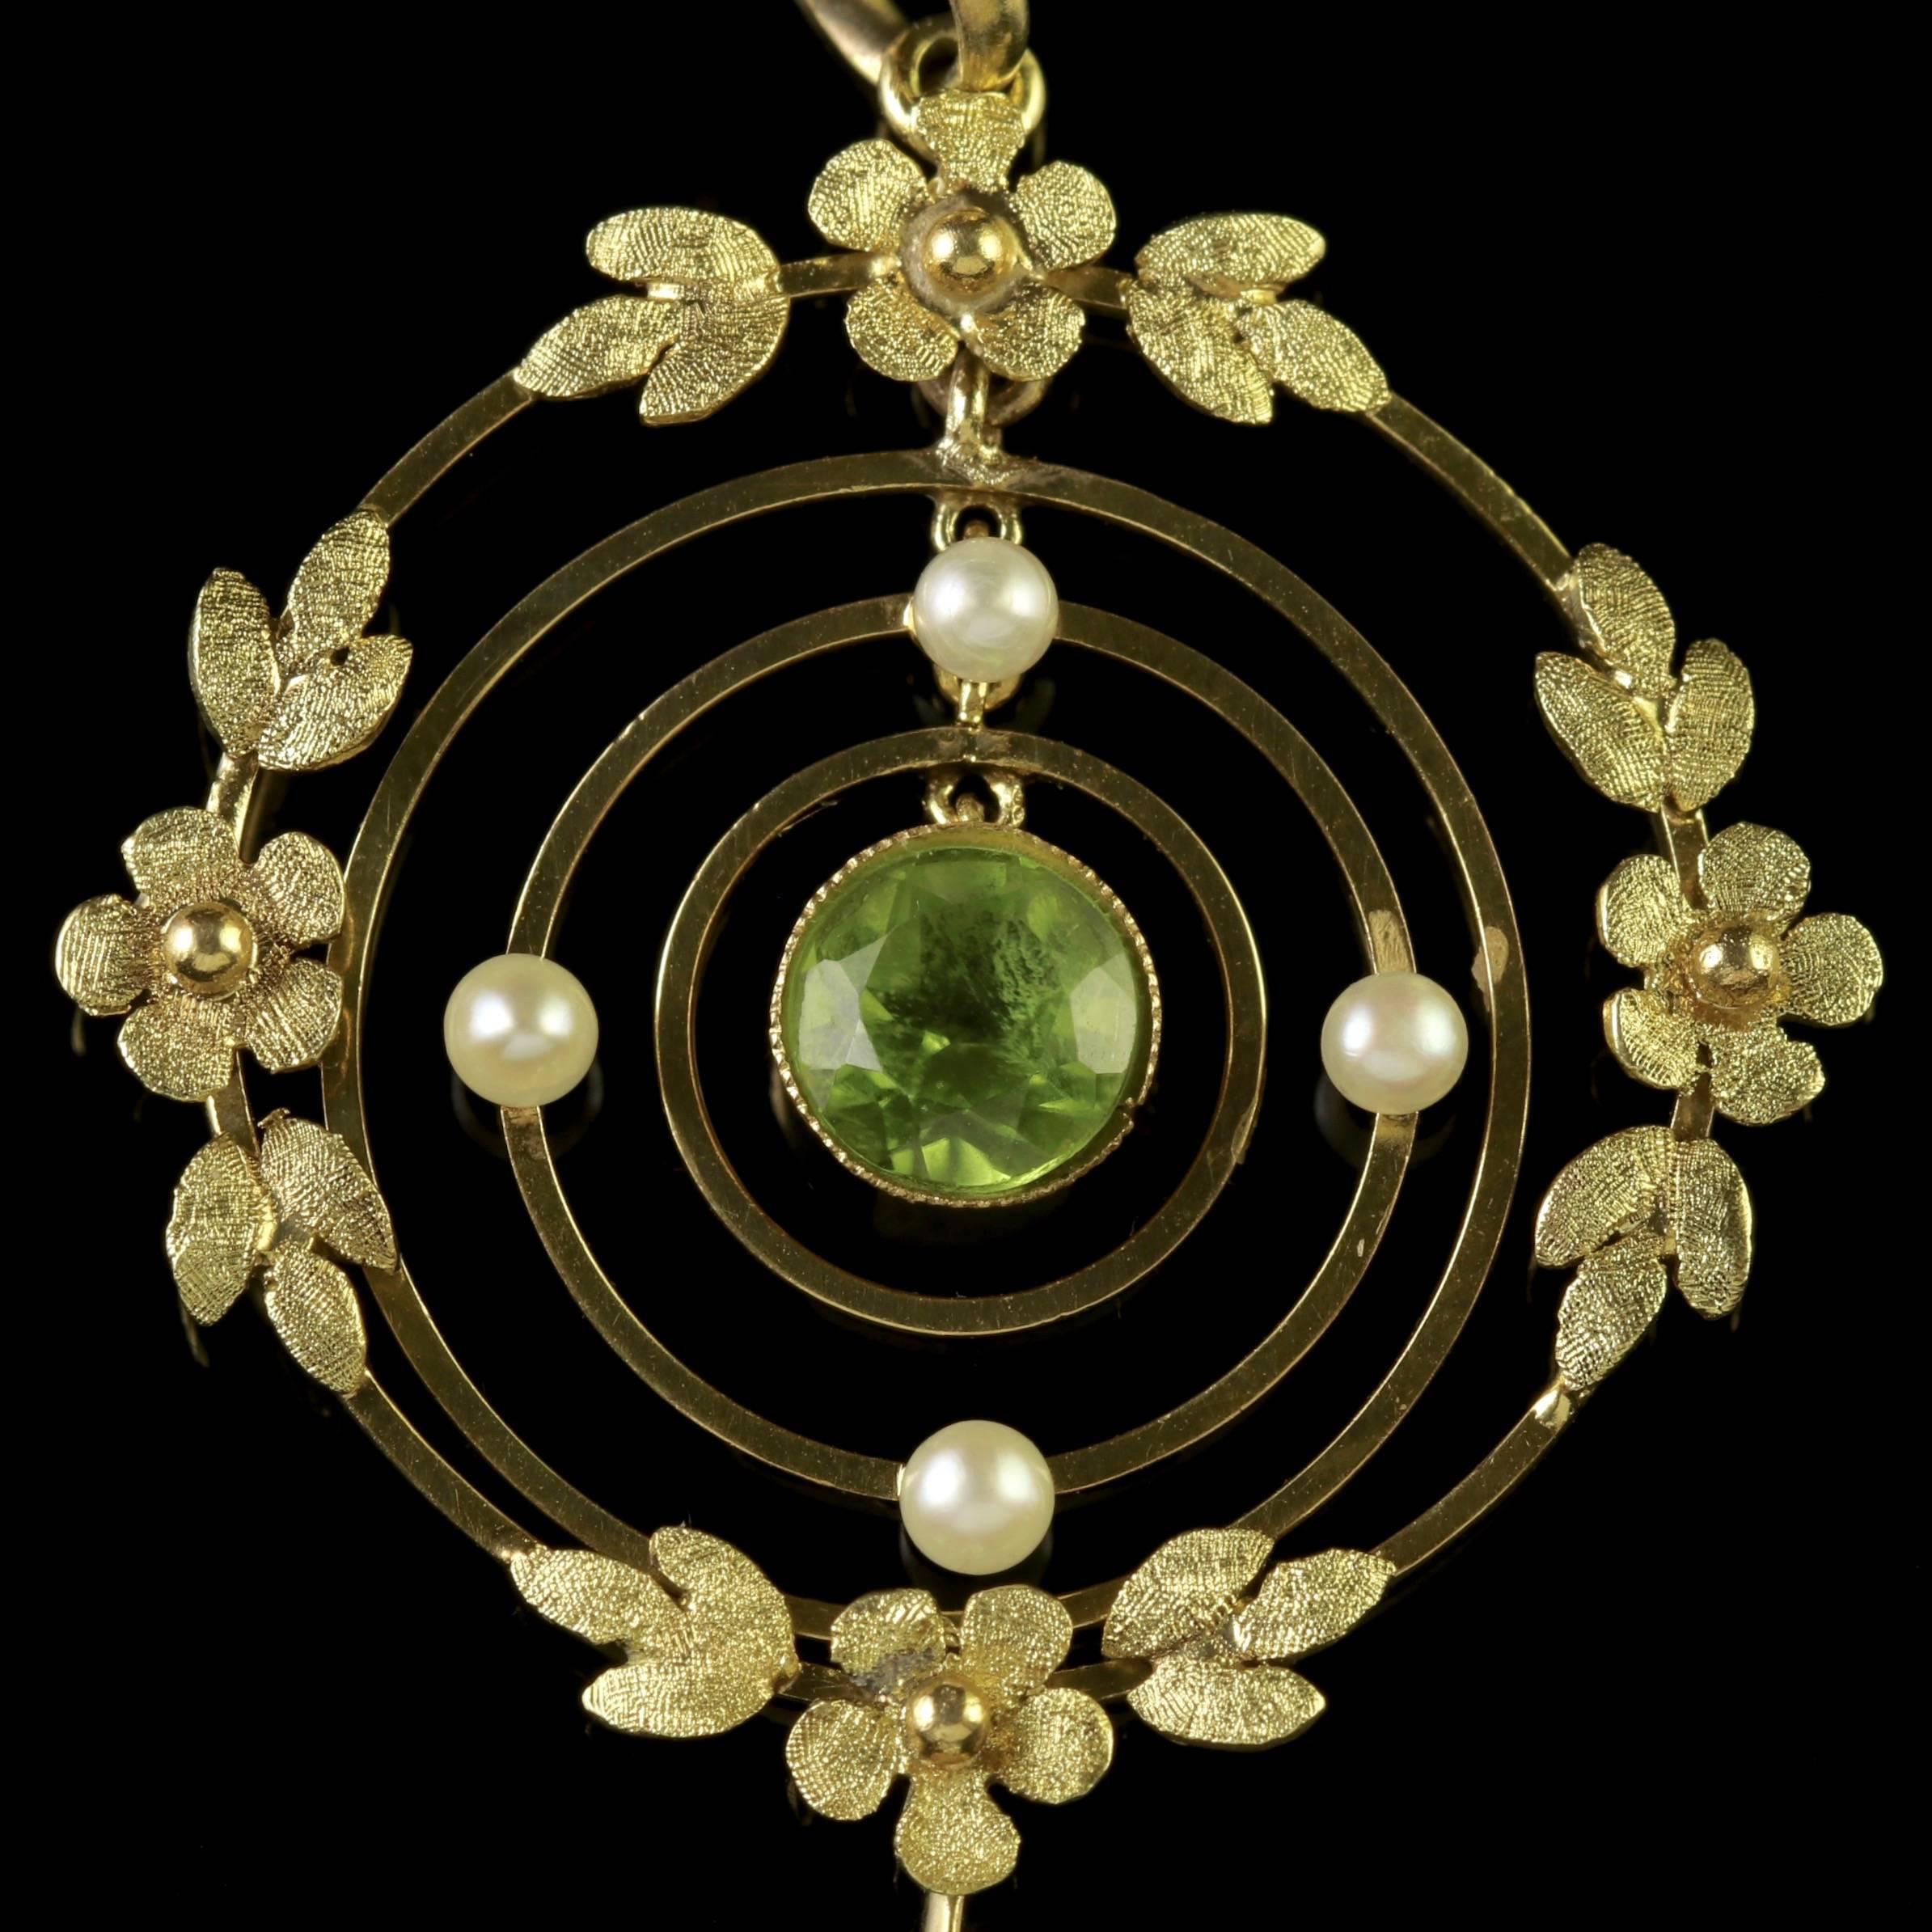 To read more please click continue reading below-
 
This fabulous antique Victorian 15ct Gold Suffragette pendant is Circa 1900. 

Emmeline Pankhurst was the leader of the British Suffragette movement in the 19th century and through her efforts won